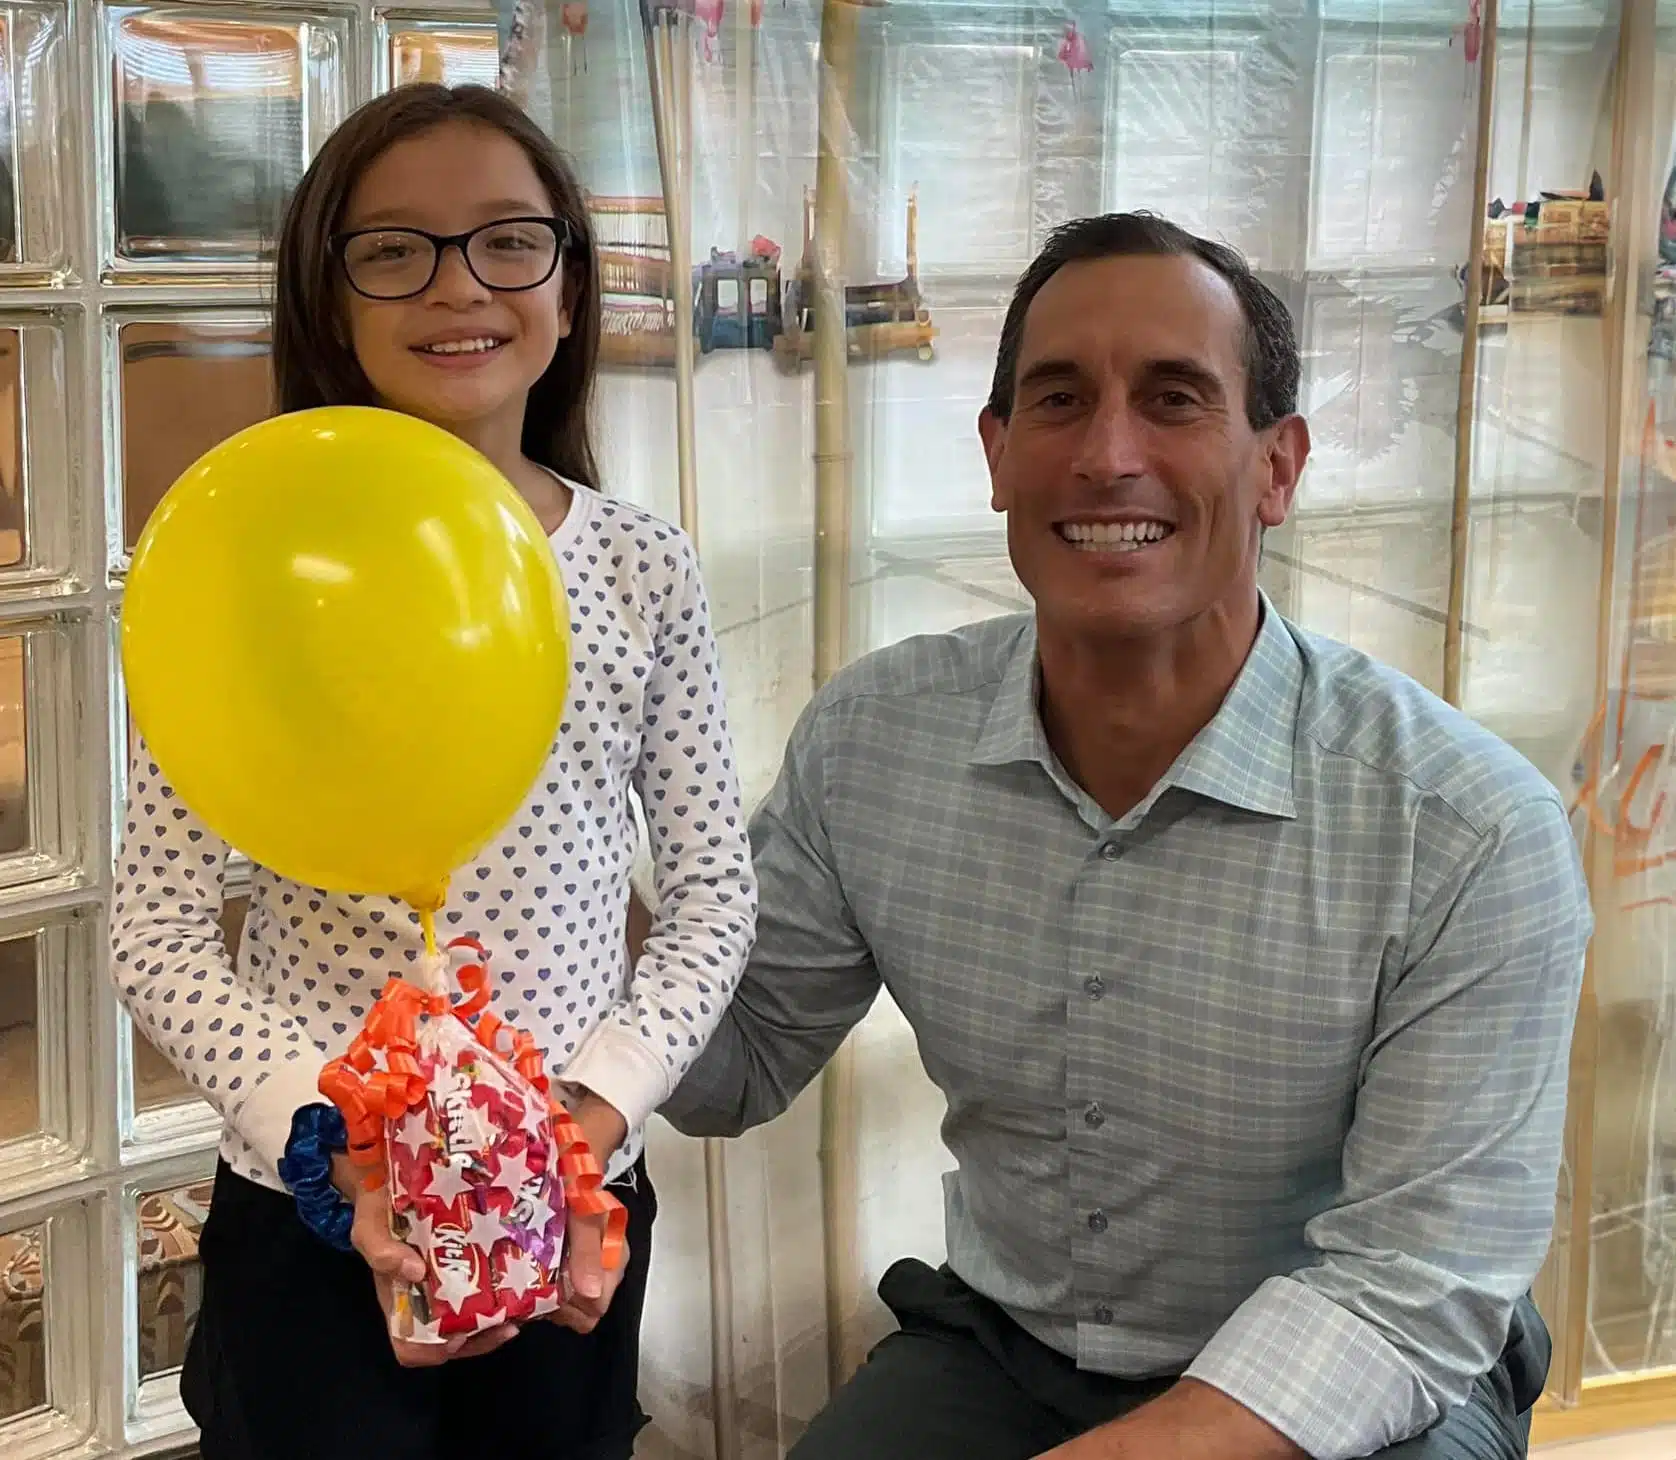 Dr-Cruz-and-Patient-with-Yellow-Balloon-min